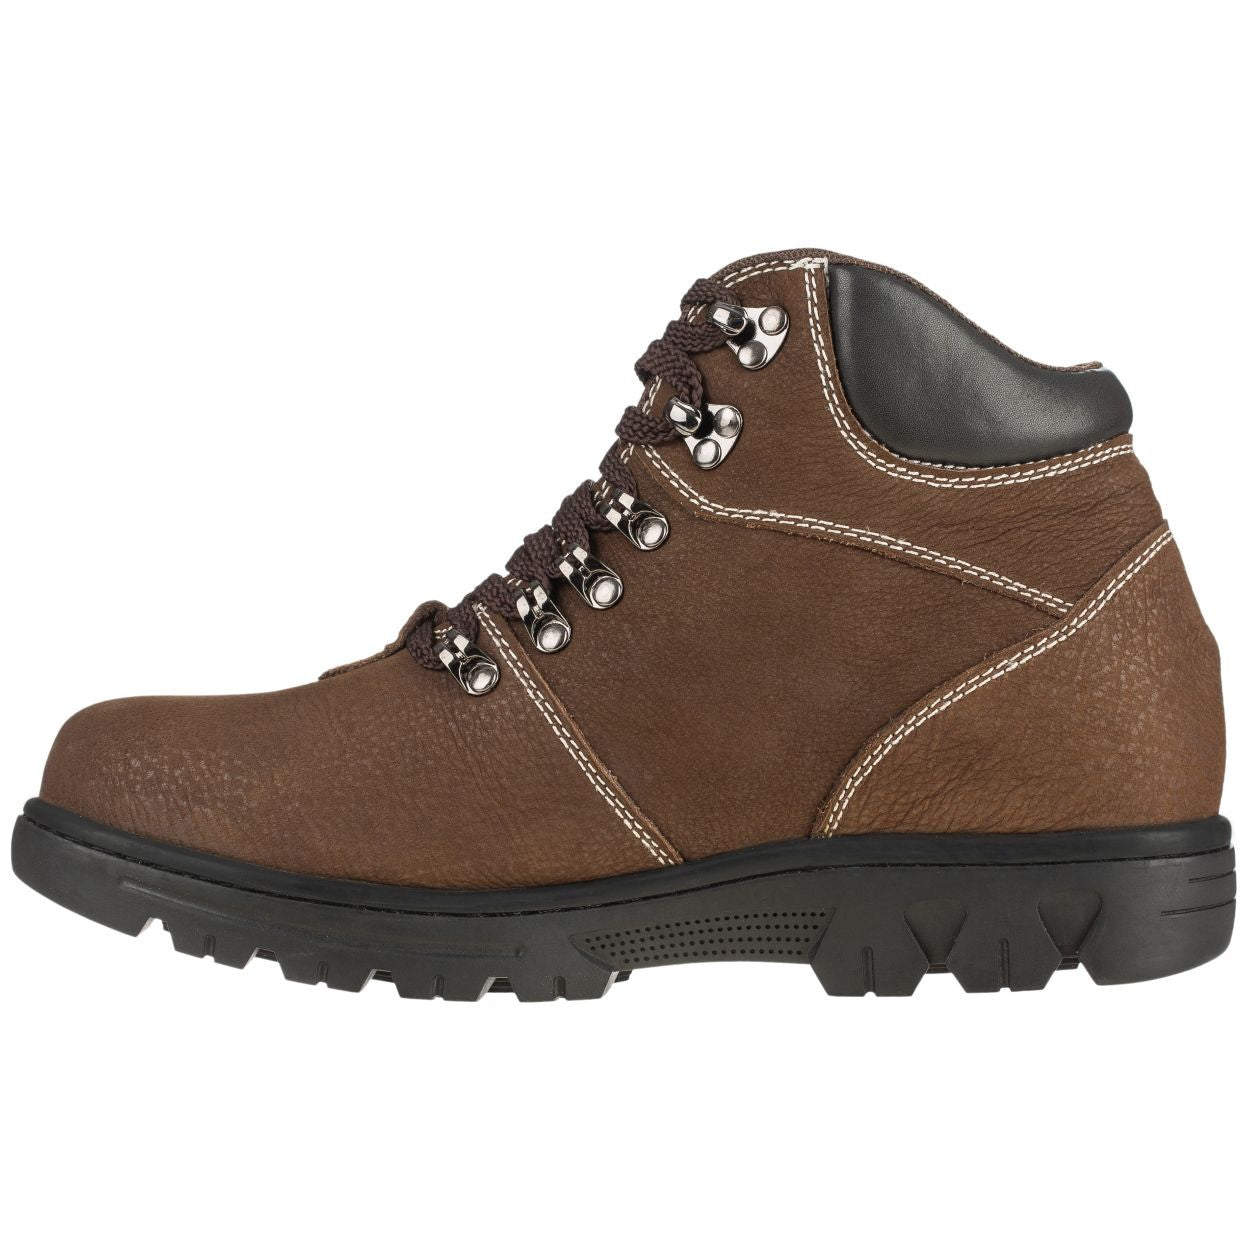 Elevator shoes height increase CALDEN Work-Style Elevator Boots (Nubuck Khaki Brown) - Three Inches - K228112